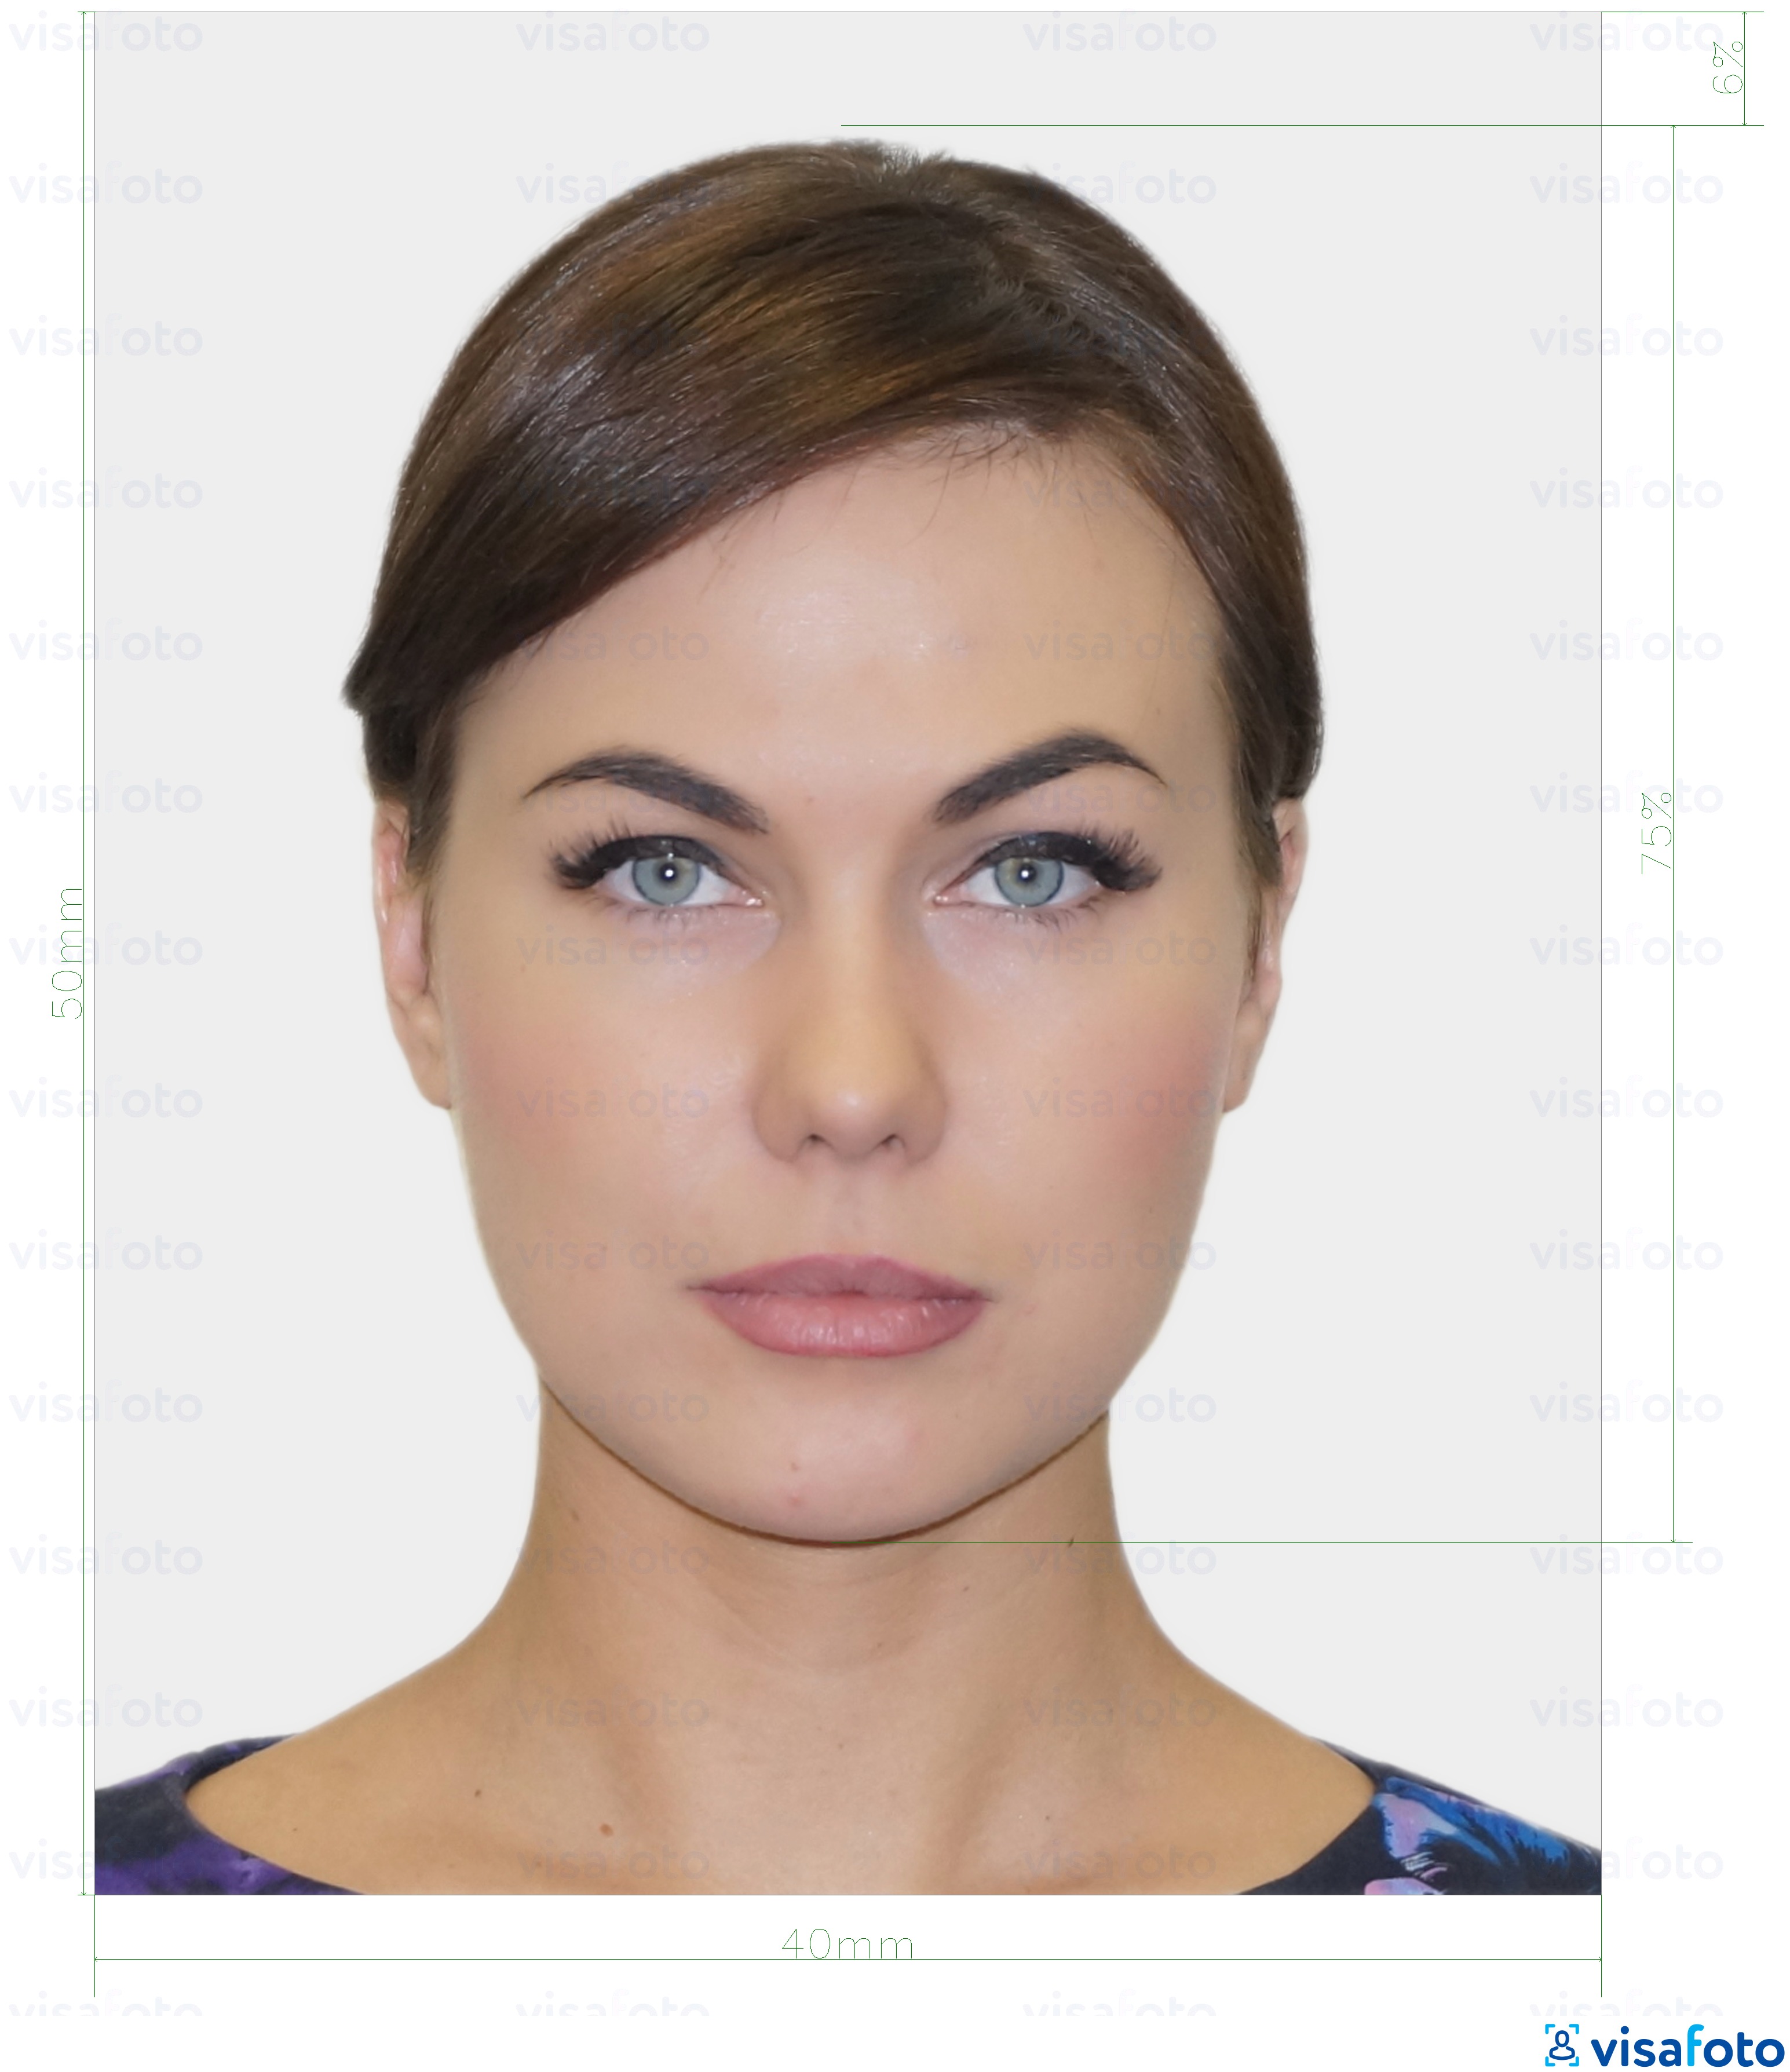 Example of photo for Estonia ID card (ID-kaart) 40x50 mm (4x5 cm) with exact size specification